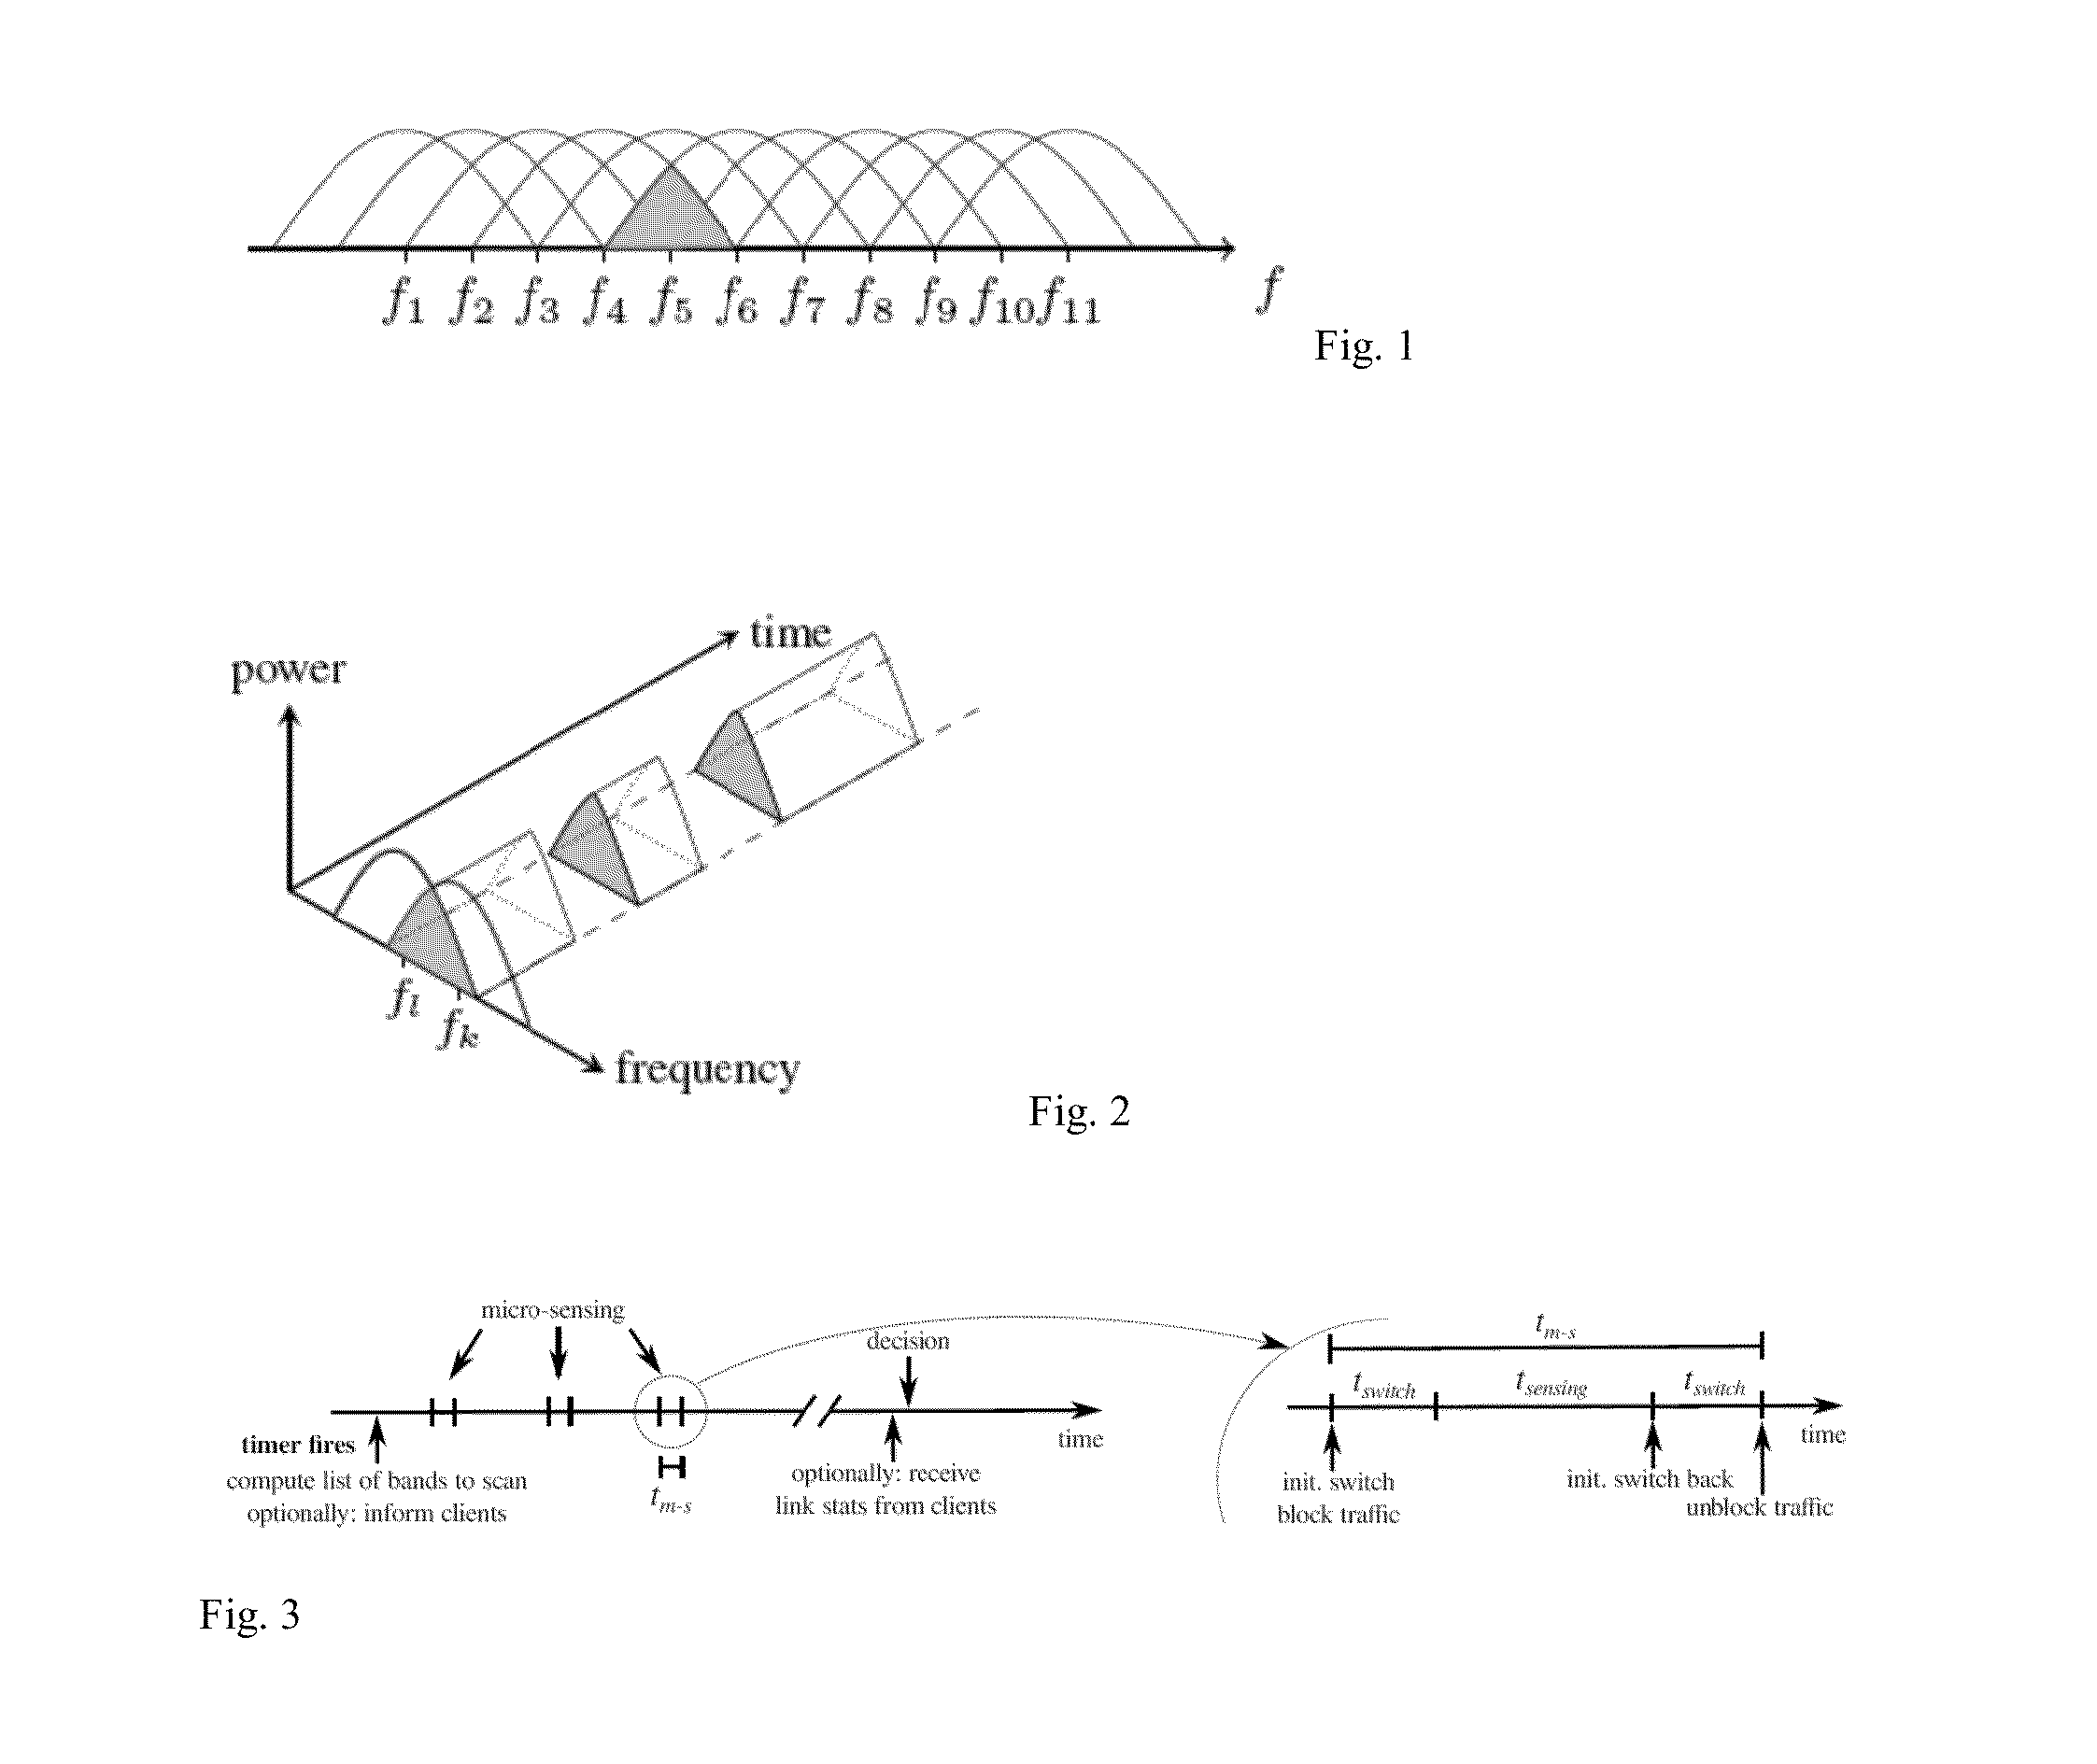 Method to optimize the communication parameters between an access point and at least one client device